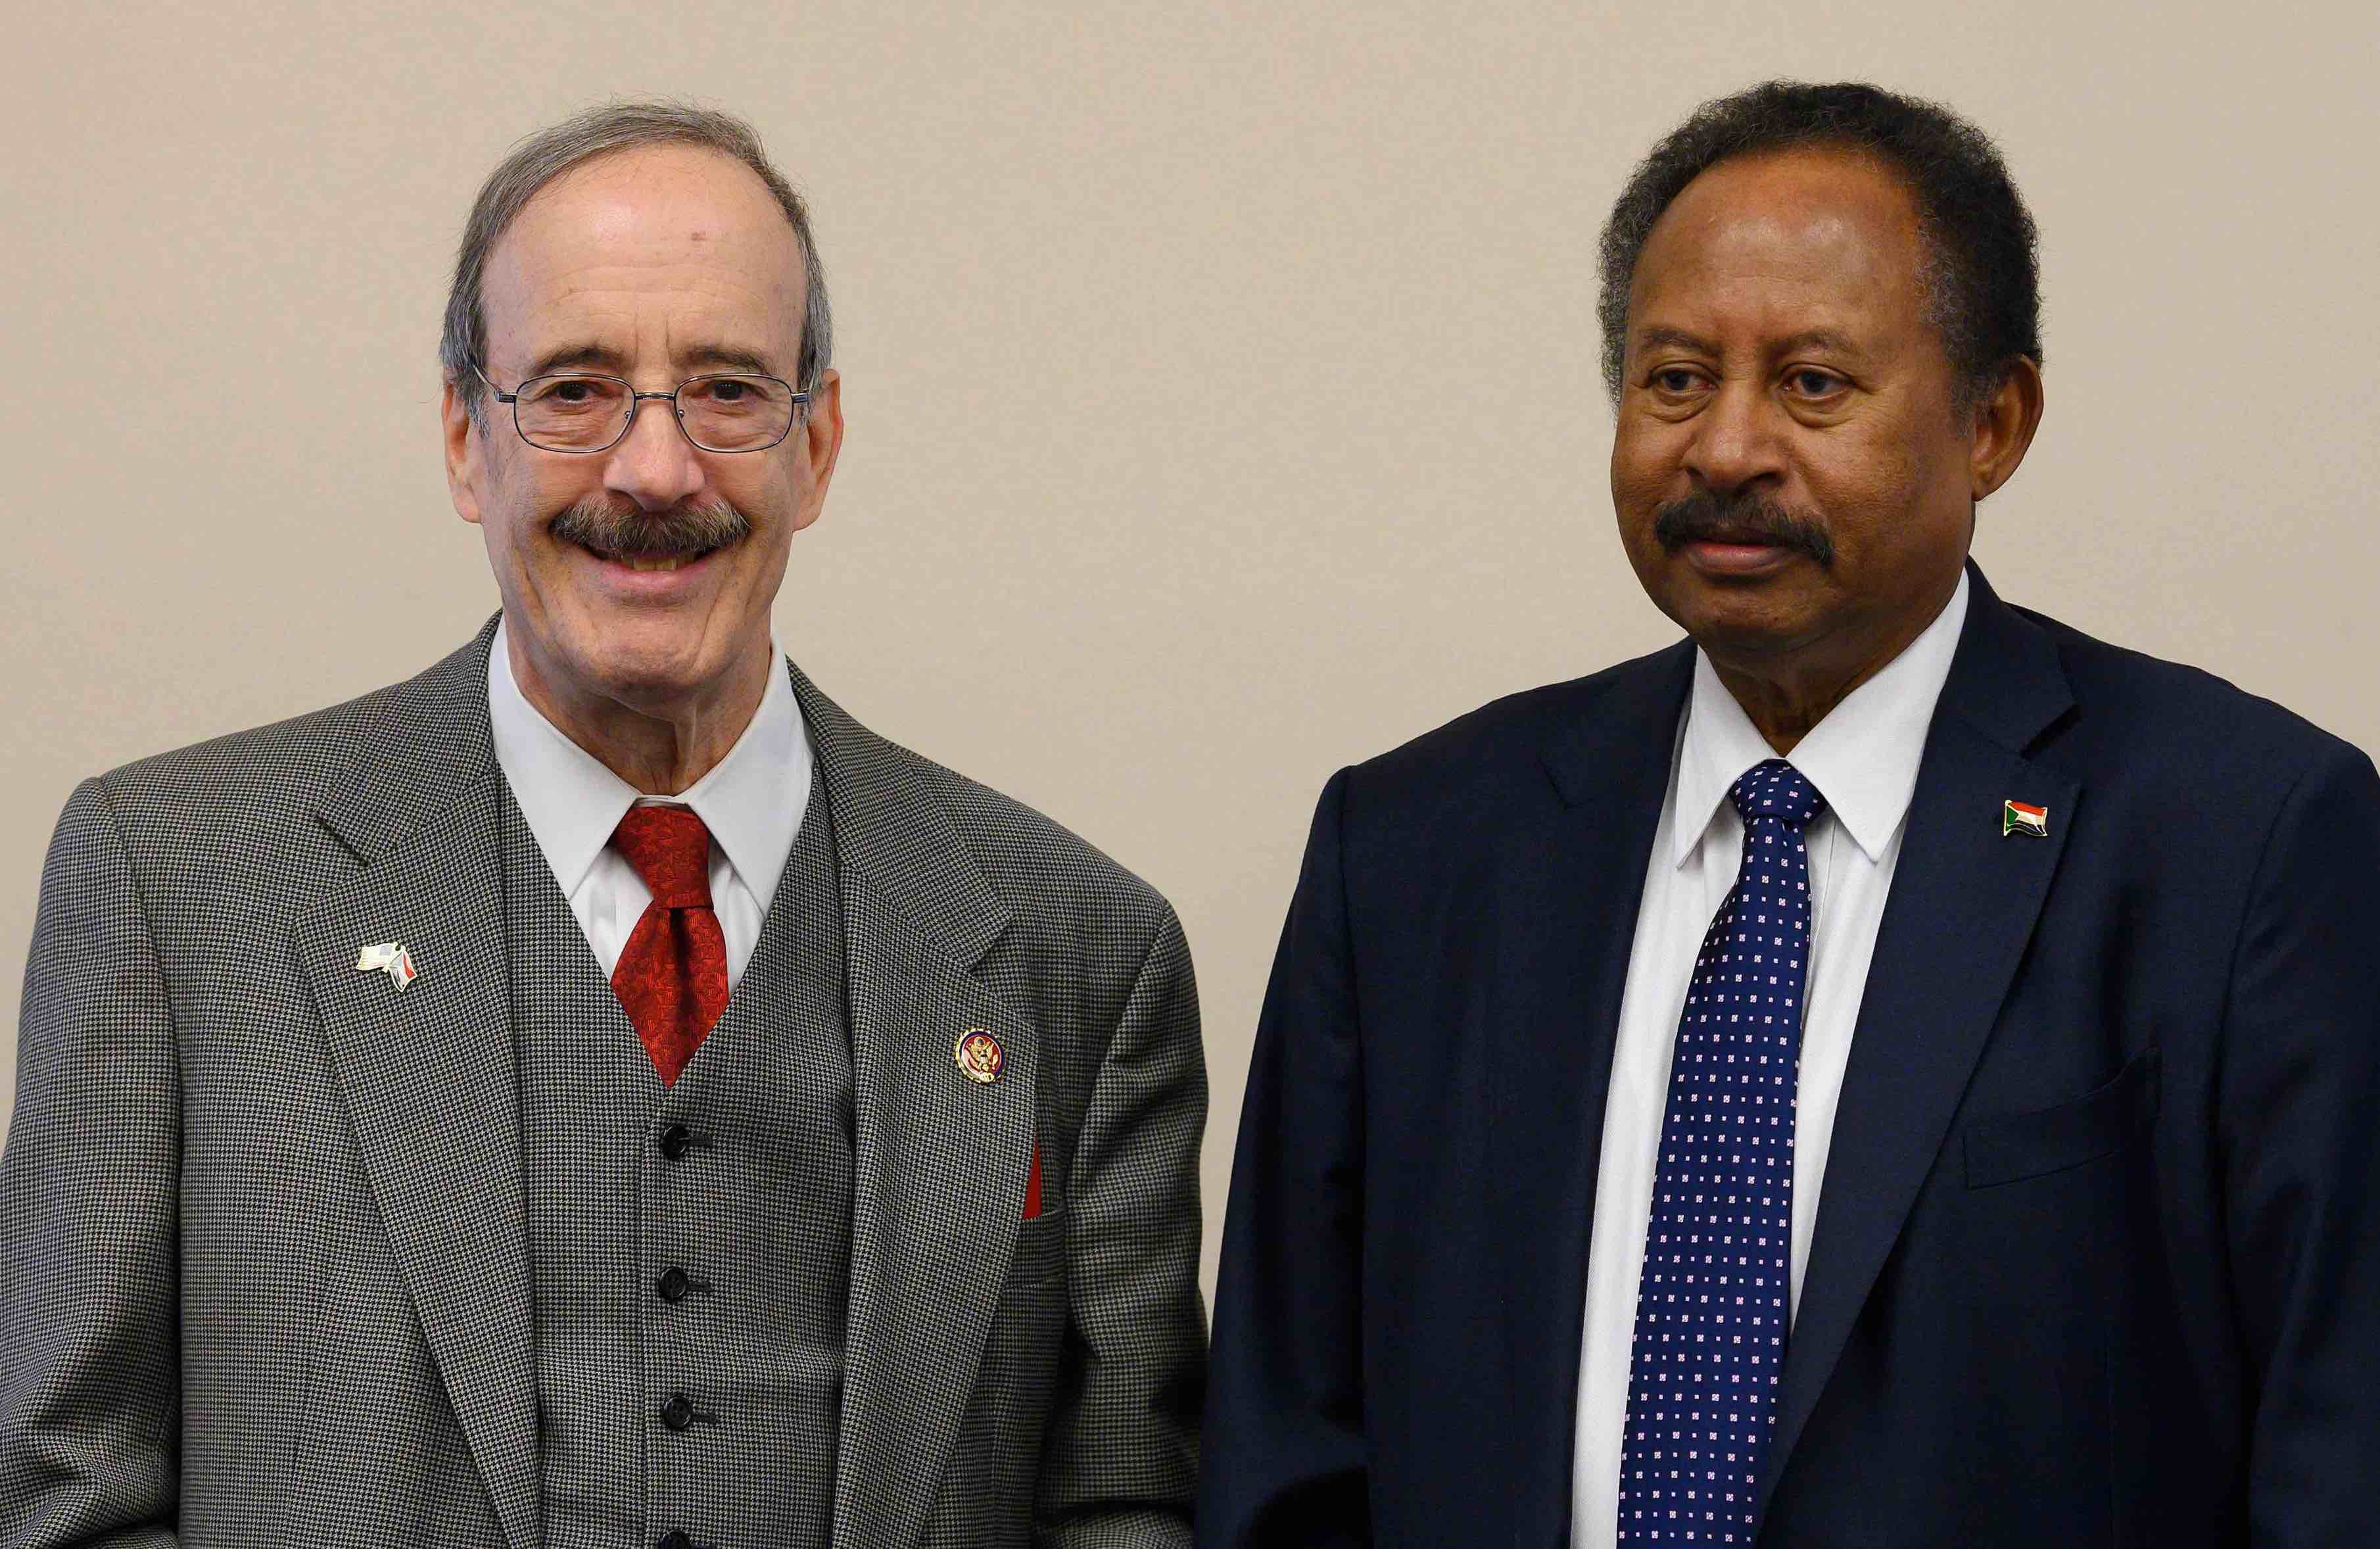 Hamdok, a British-educated former diplomat and UN official, is the first Sudanese leader to visit Washington since 1985